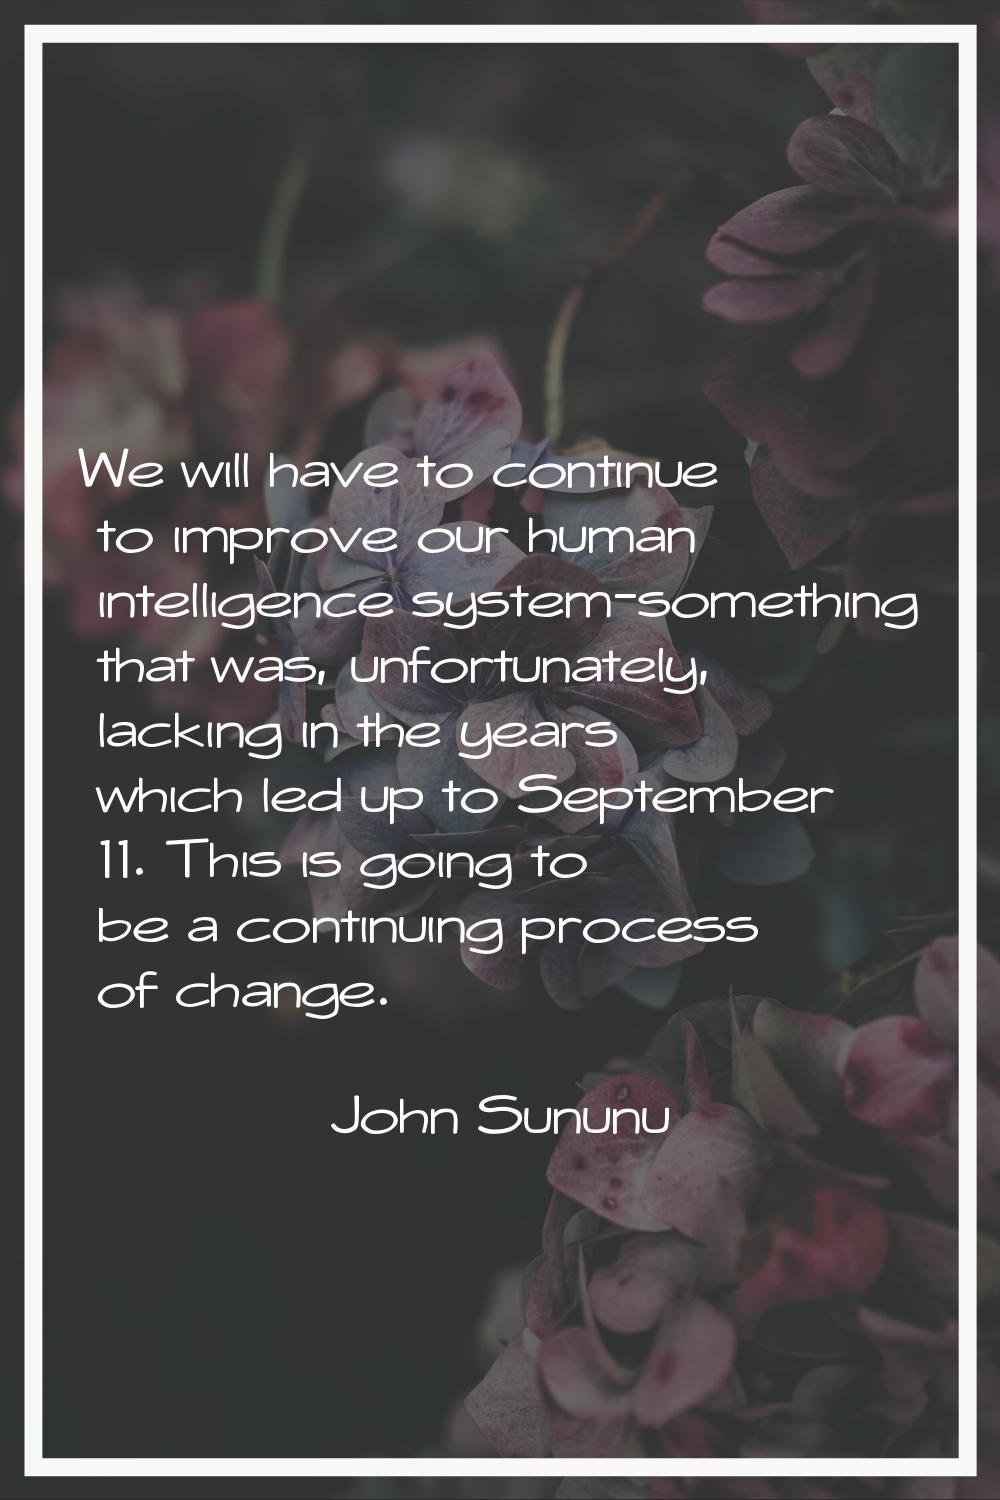 We will have to continue to improve our human intelligence system-something that was, unfortunately